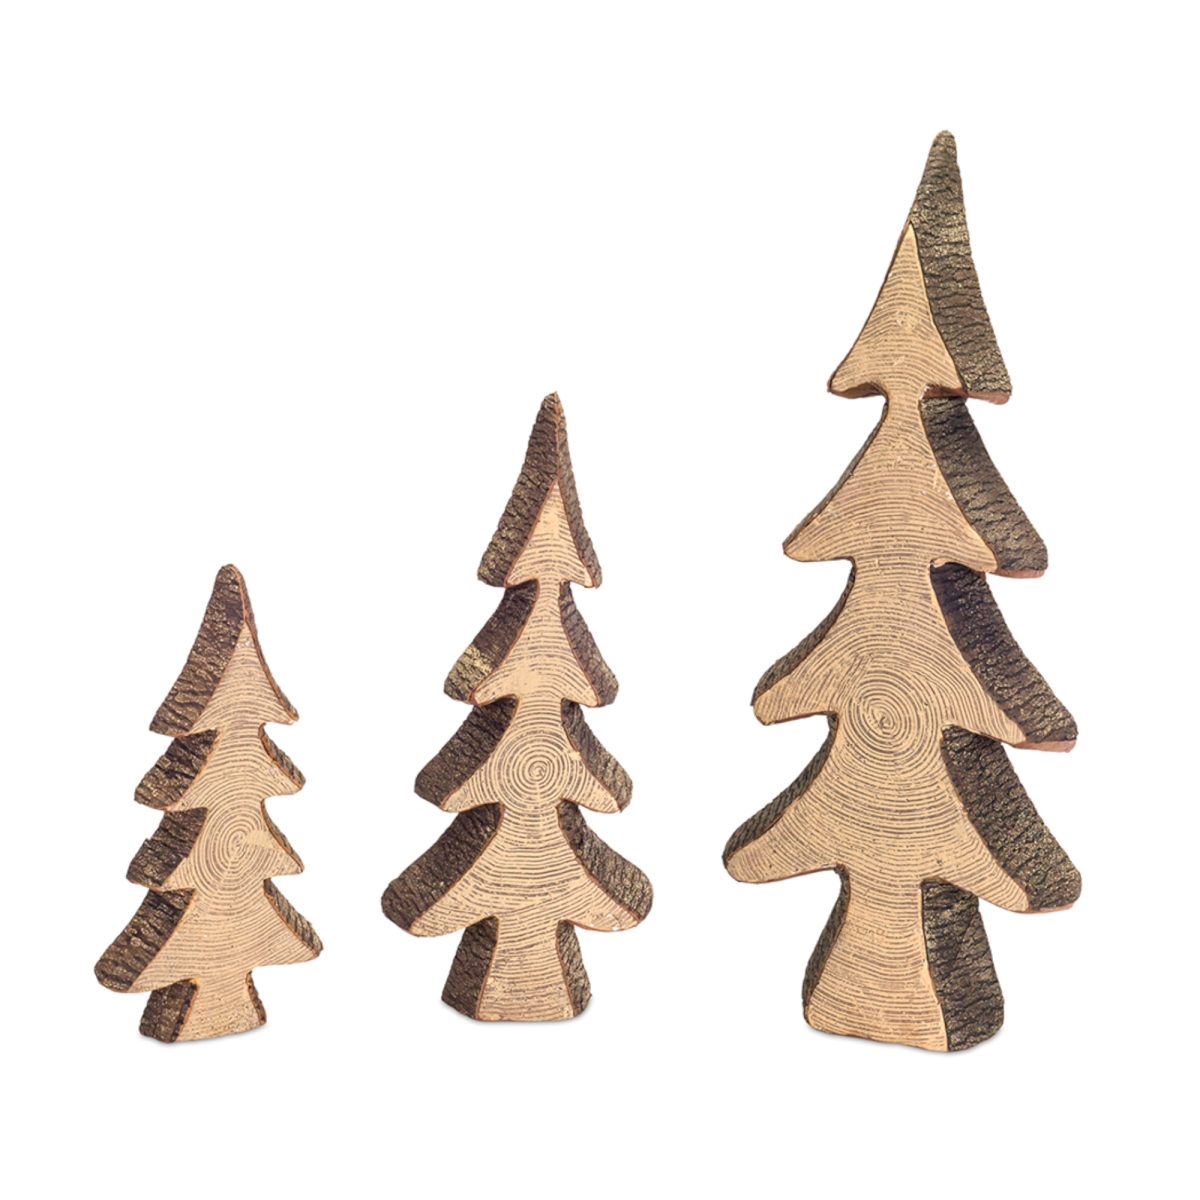 UPC 746427724616 product image for 72461DS 15.5 x 20 x 29 in. Foam Tree Novelty Christmas Toy, Brown - Set of 3 | upcitemdb.com